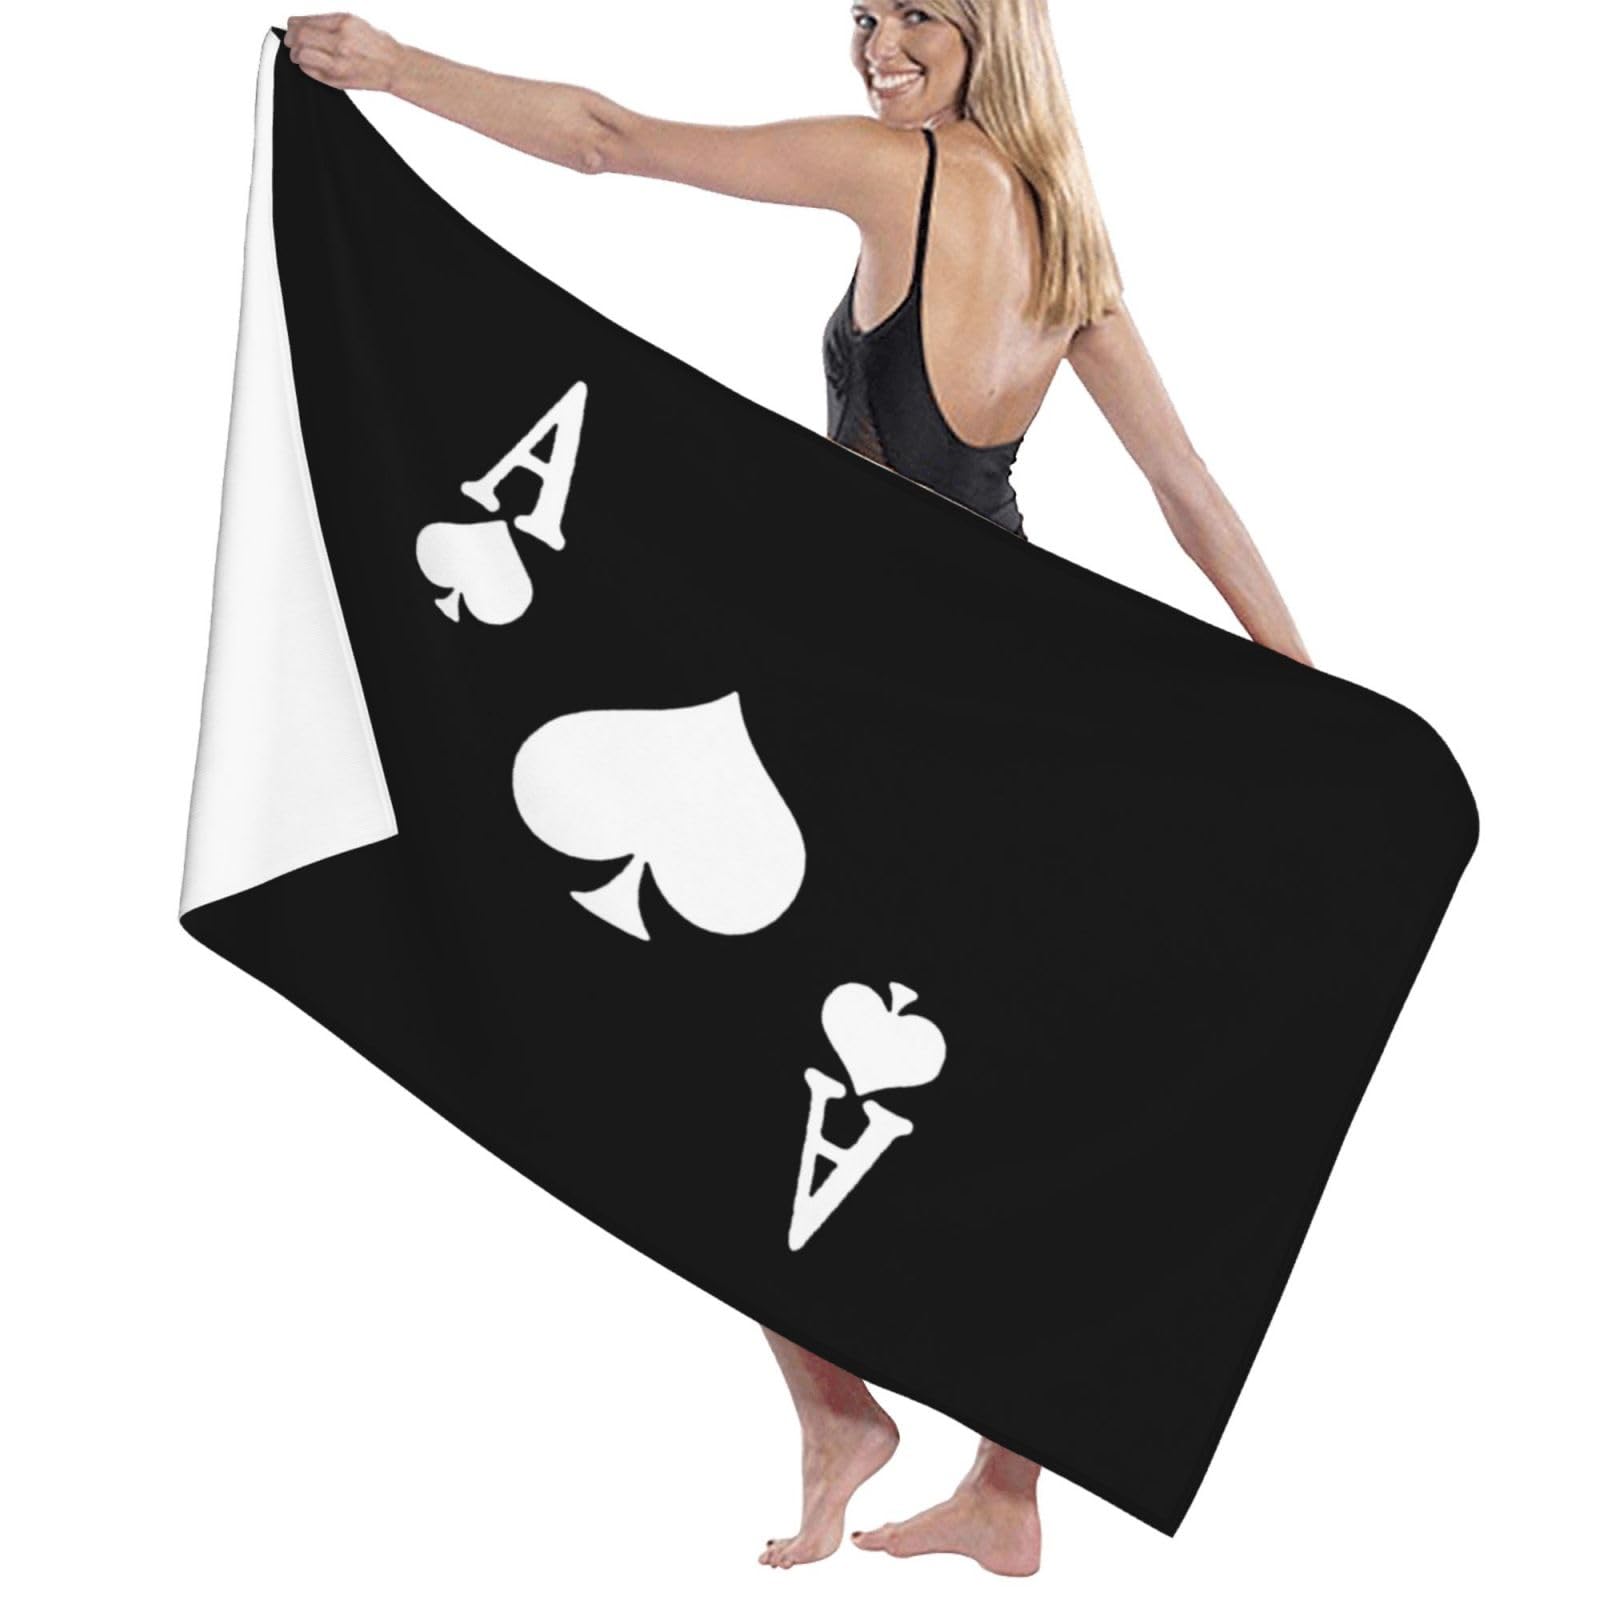 ADOSIA Ace of Spades Poker Beach Towel 32x52in Oversized Soft Absorbent Beach Towel